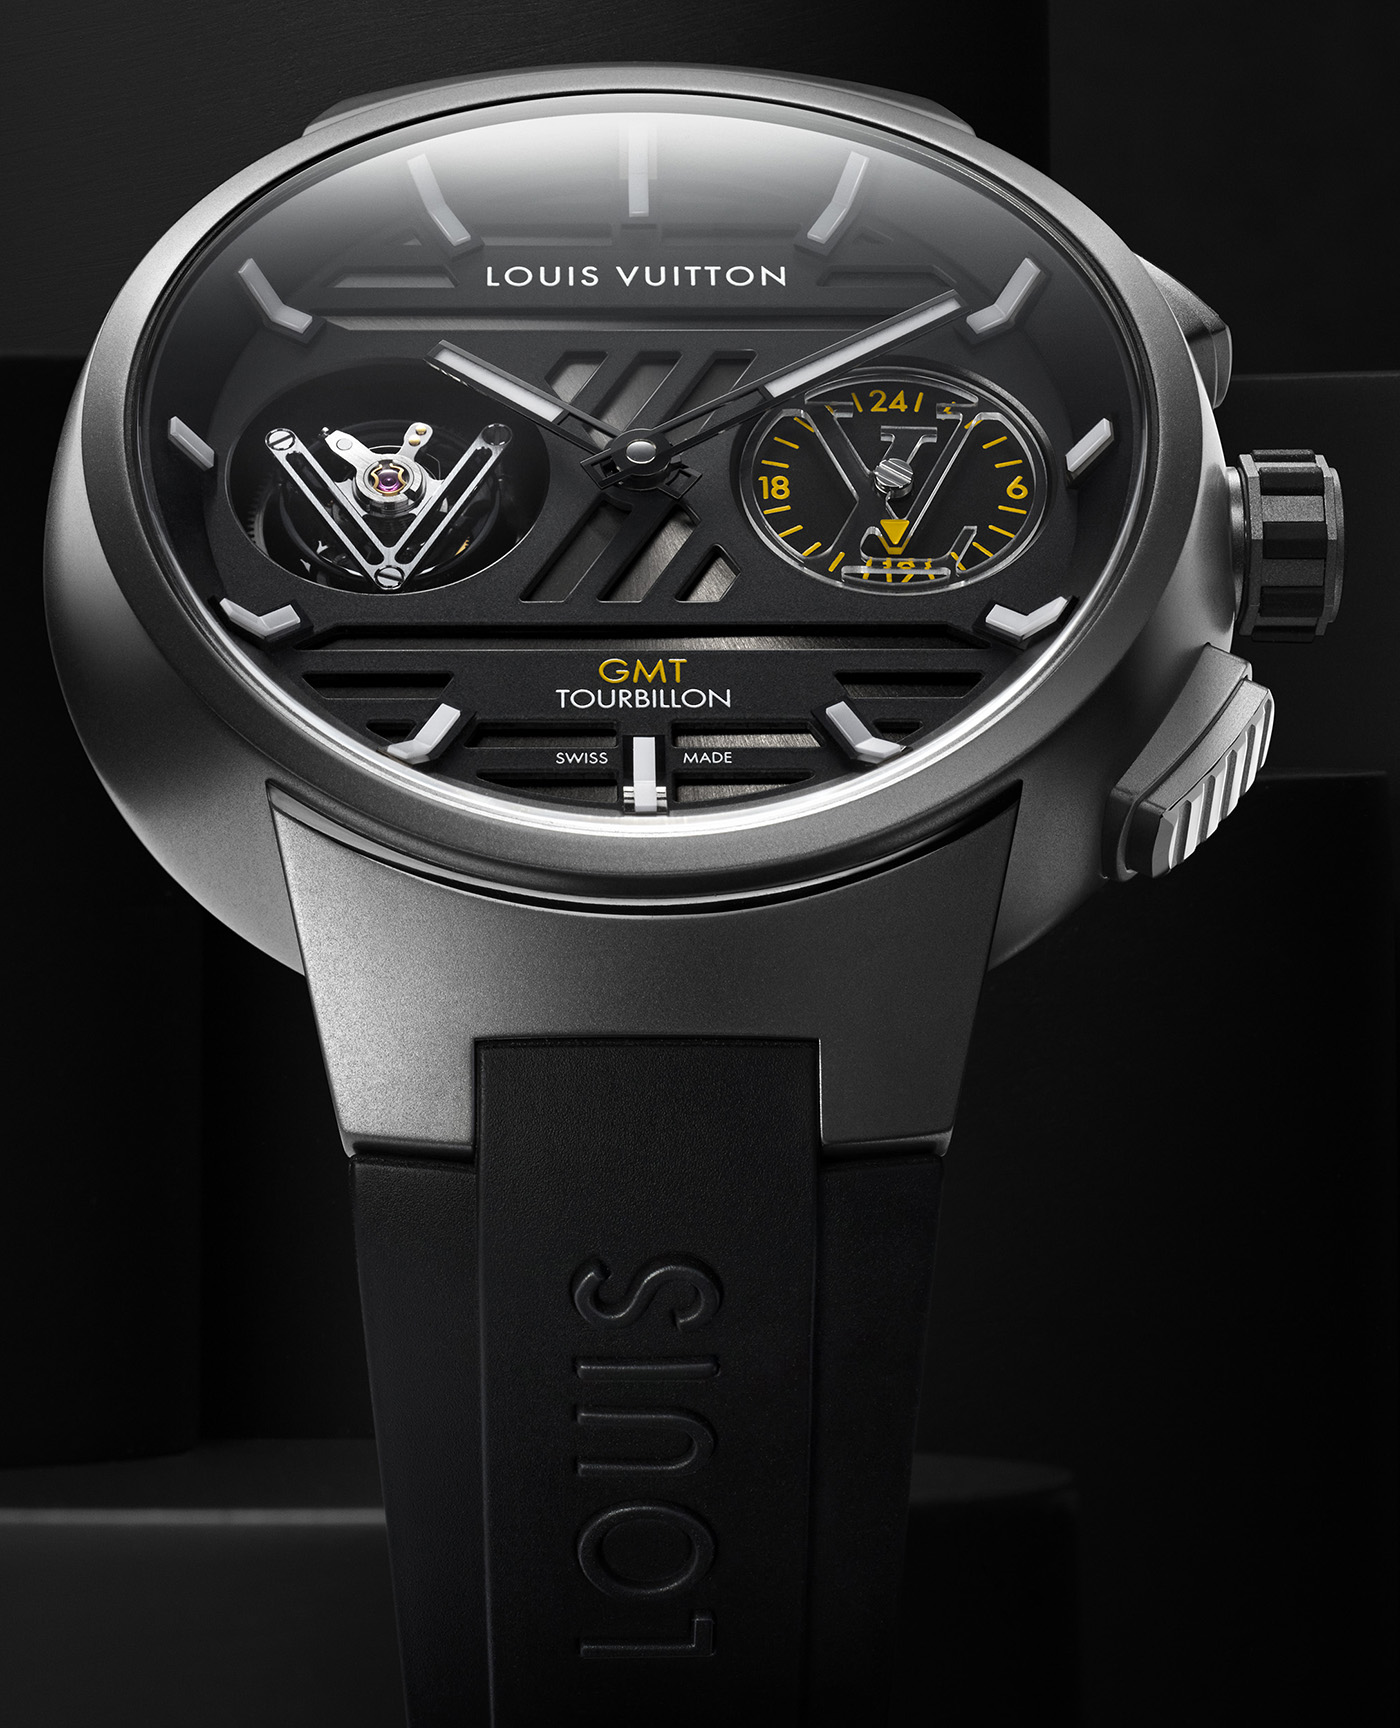 Louis Vuitton on X: Designed for urban adventures. #LouisVuitton's sporty  Tambour Outdoor watch features an ergonomic chronograph and an intuitive  GMT function. Explore the Maison's newest timepiece at   #LVWatches